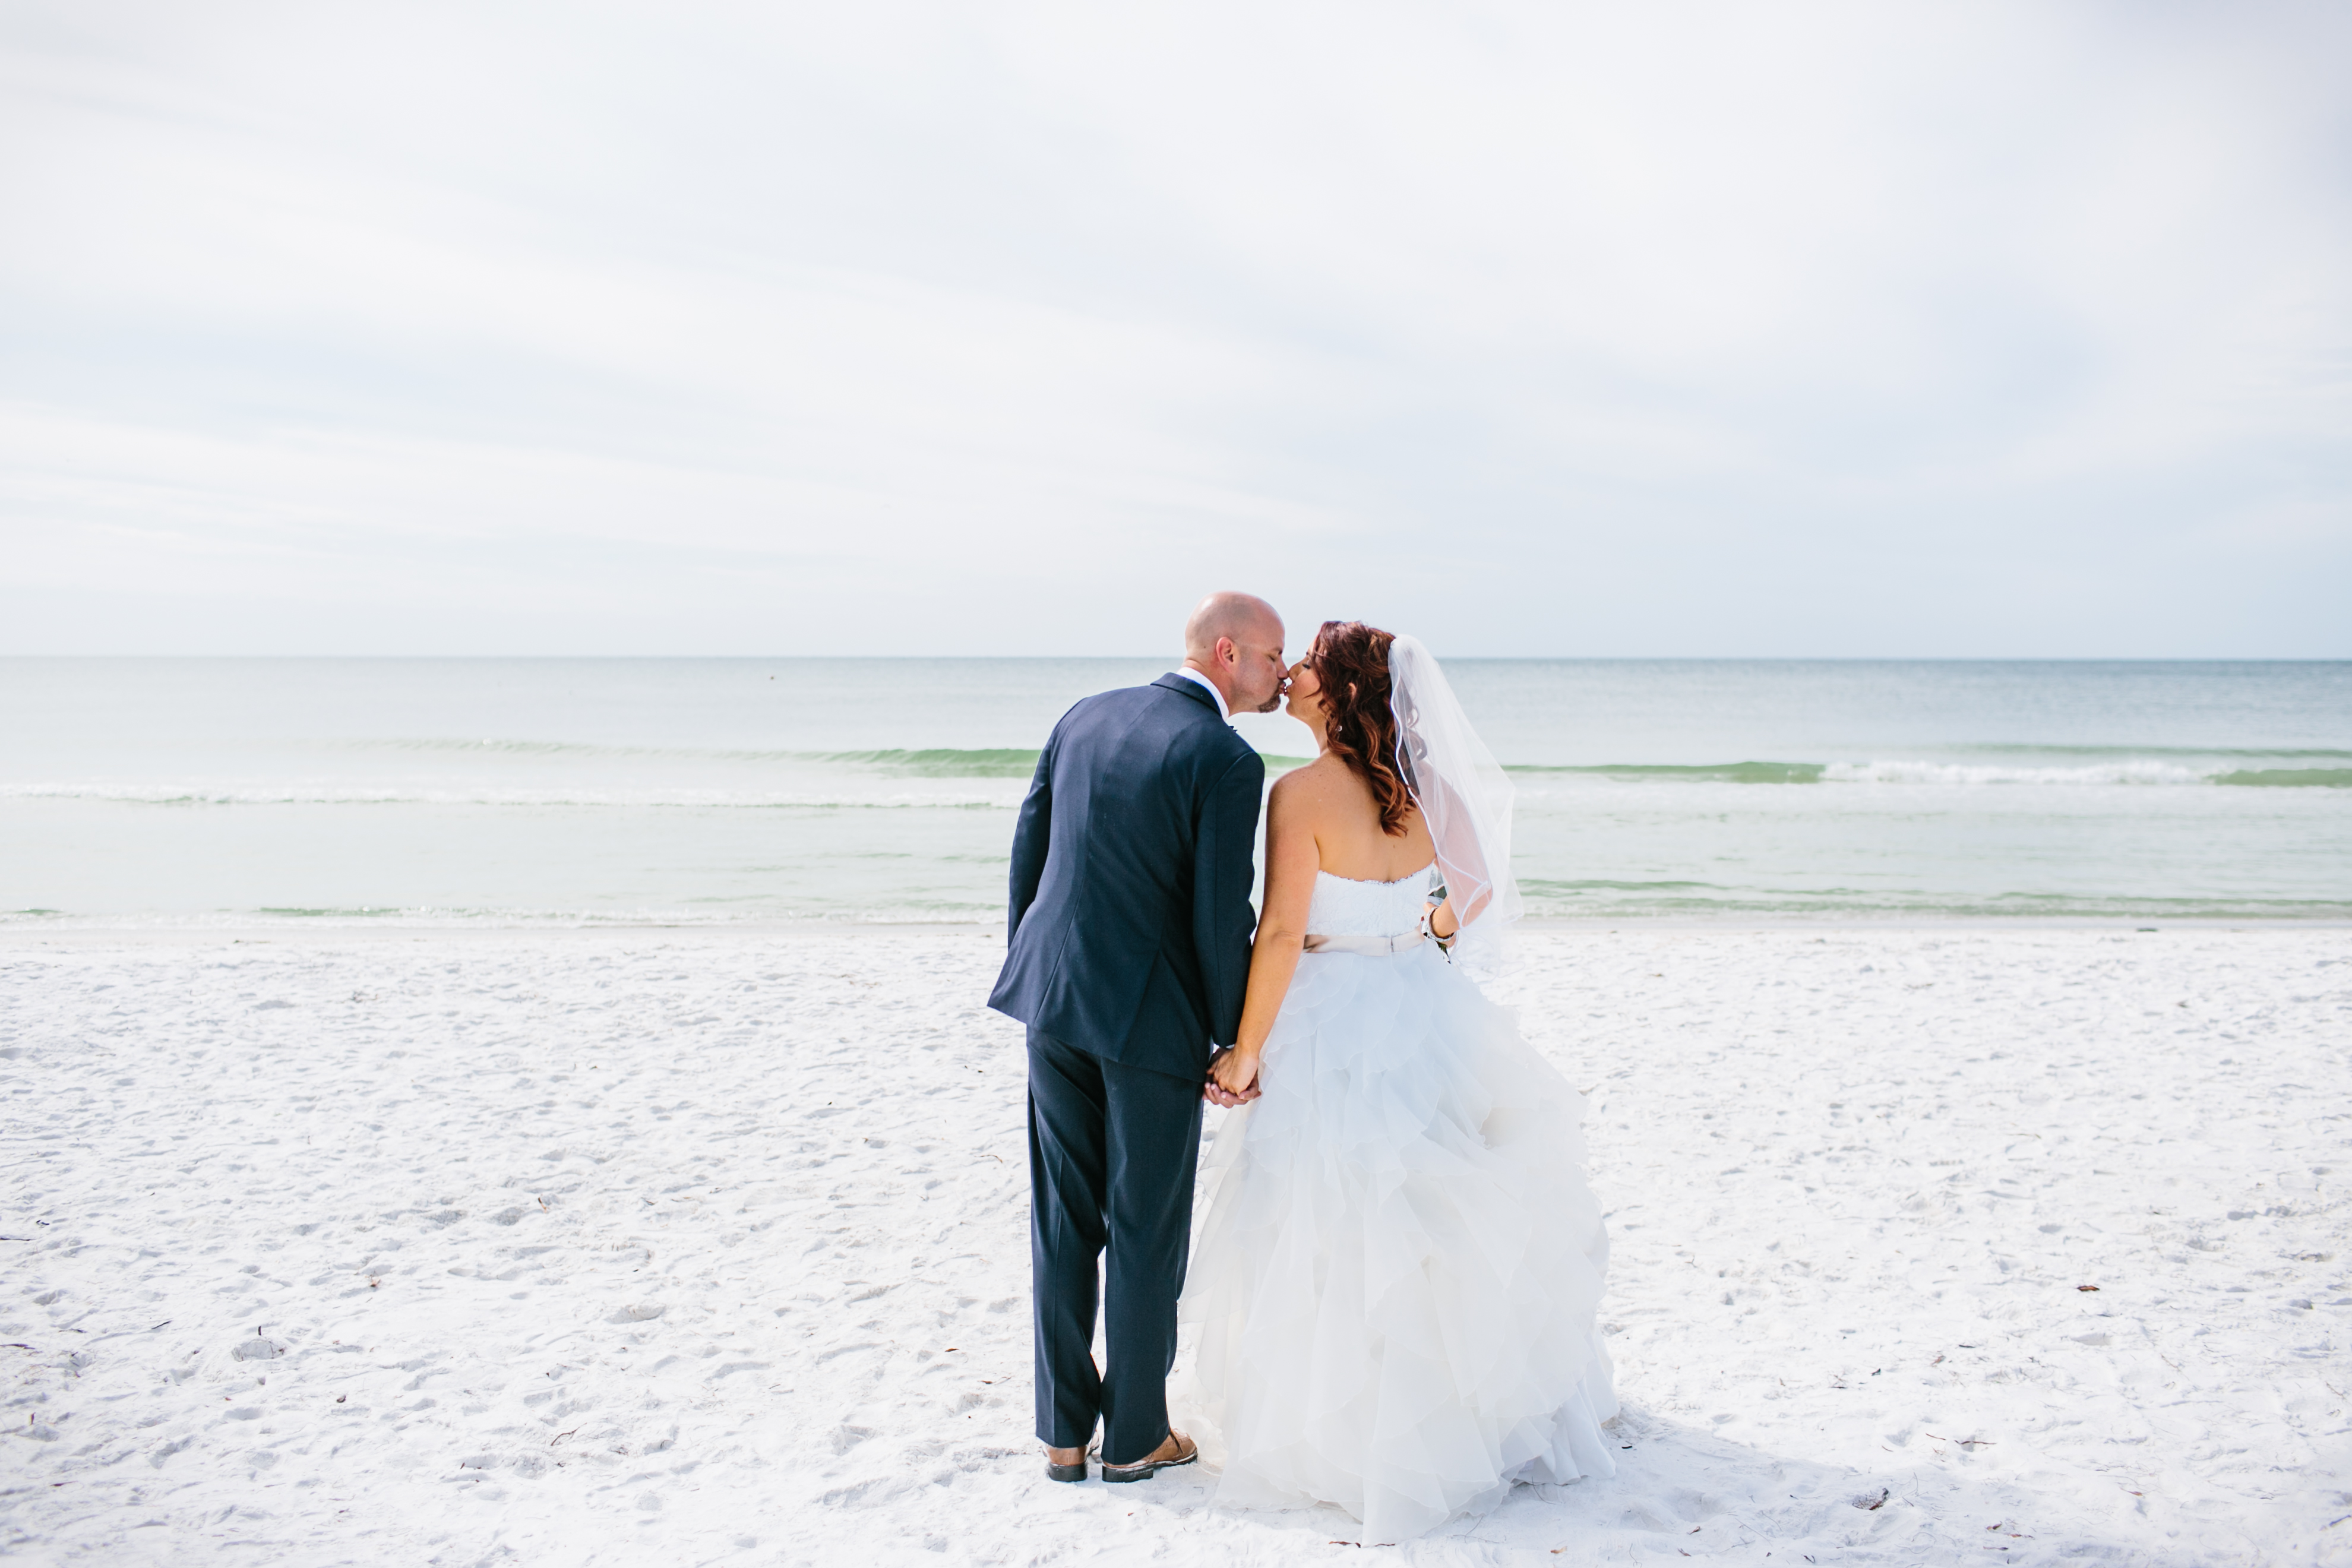 Beach Locations Tide The Knot Weddings Florida